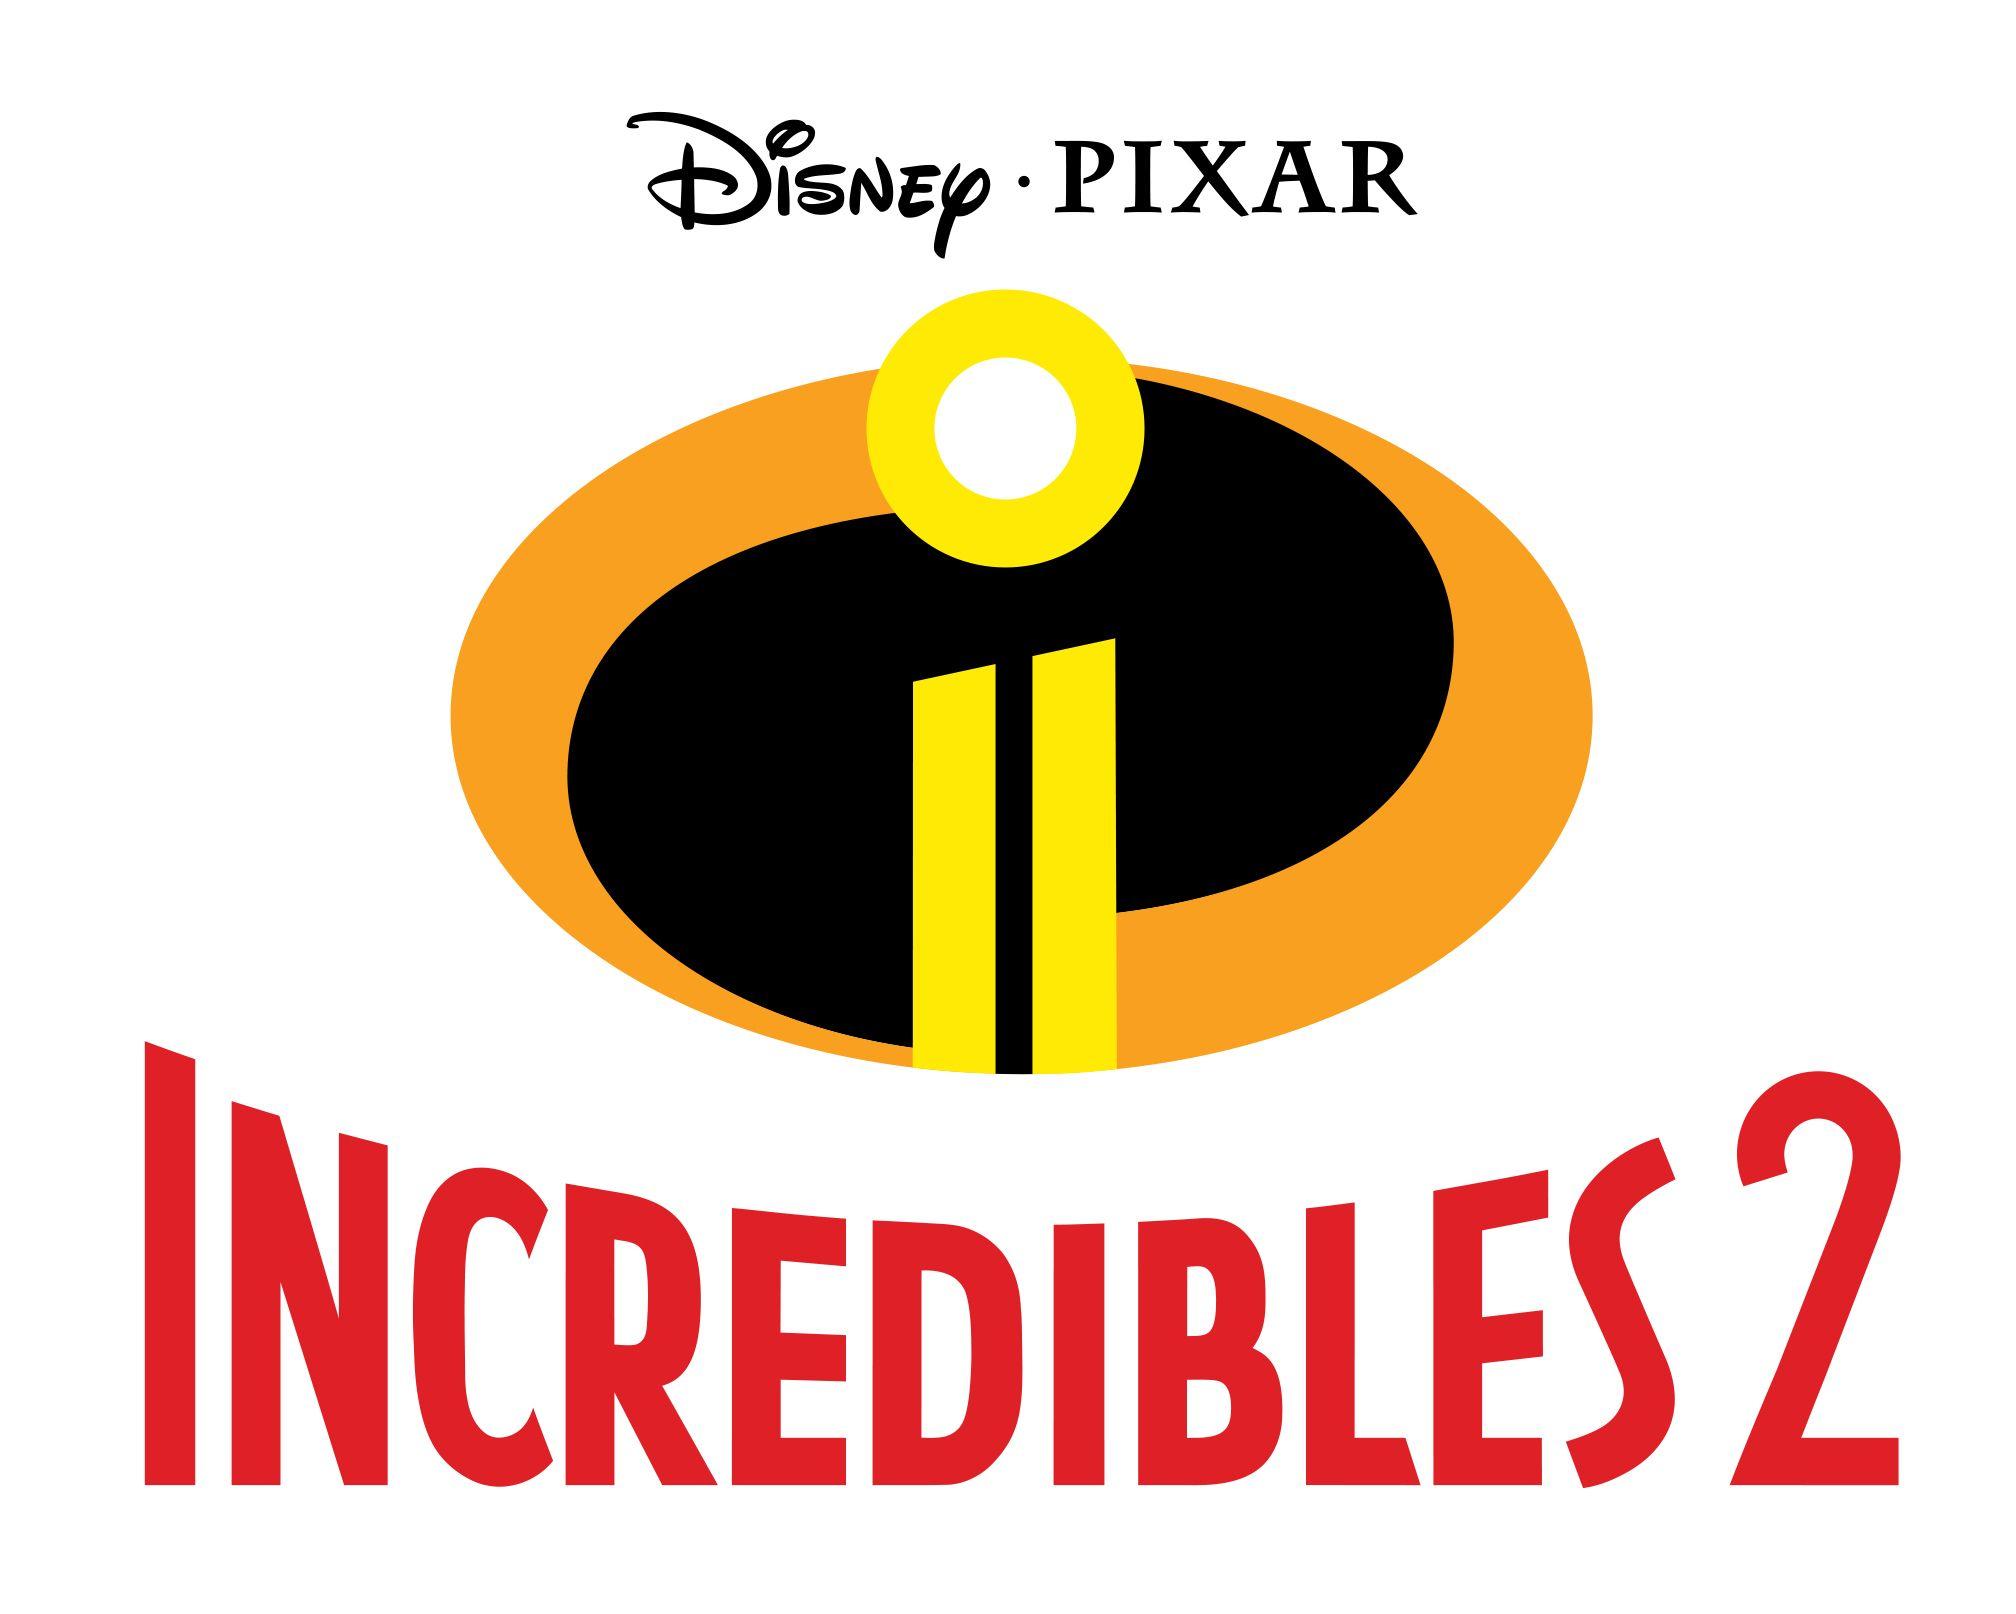 2 Disney Pixar Incredibles Logo - The Incredibles 2, Toy Story 4 and ... Planes? What we learned from ...